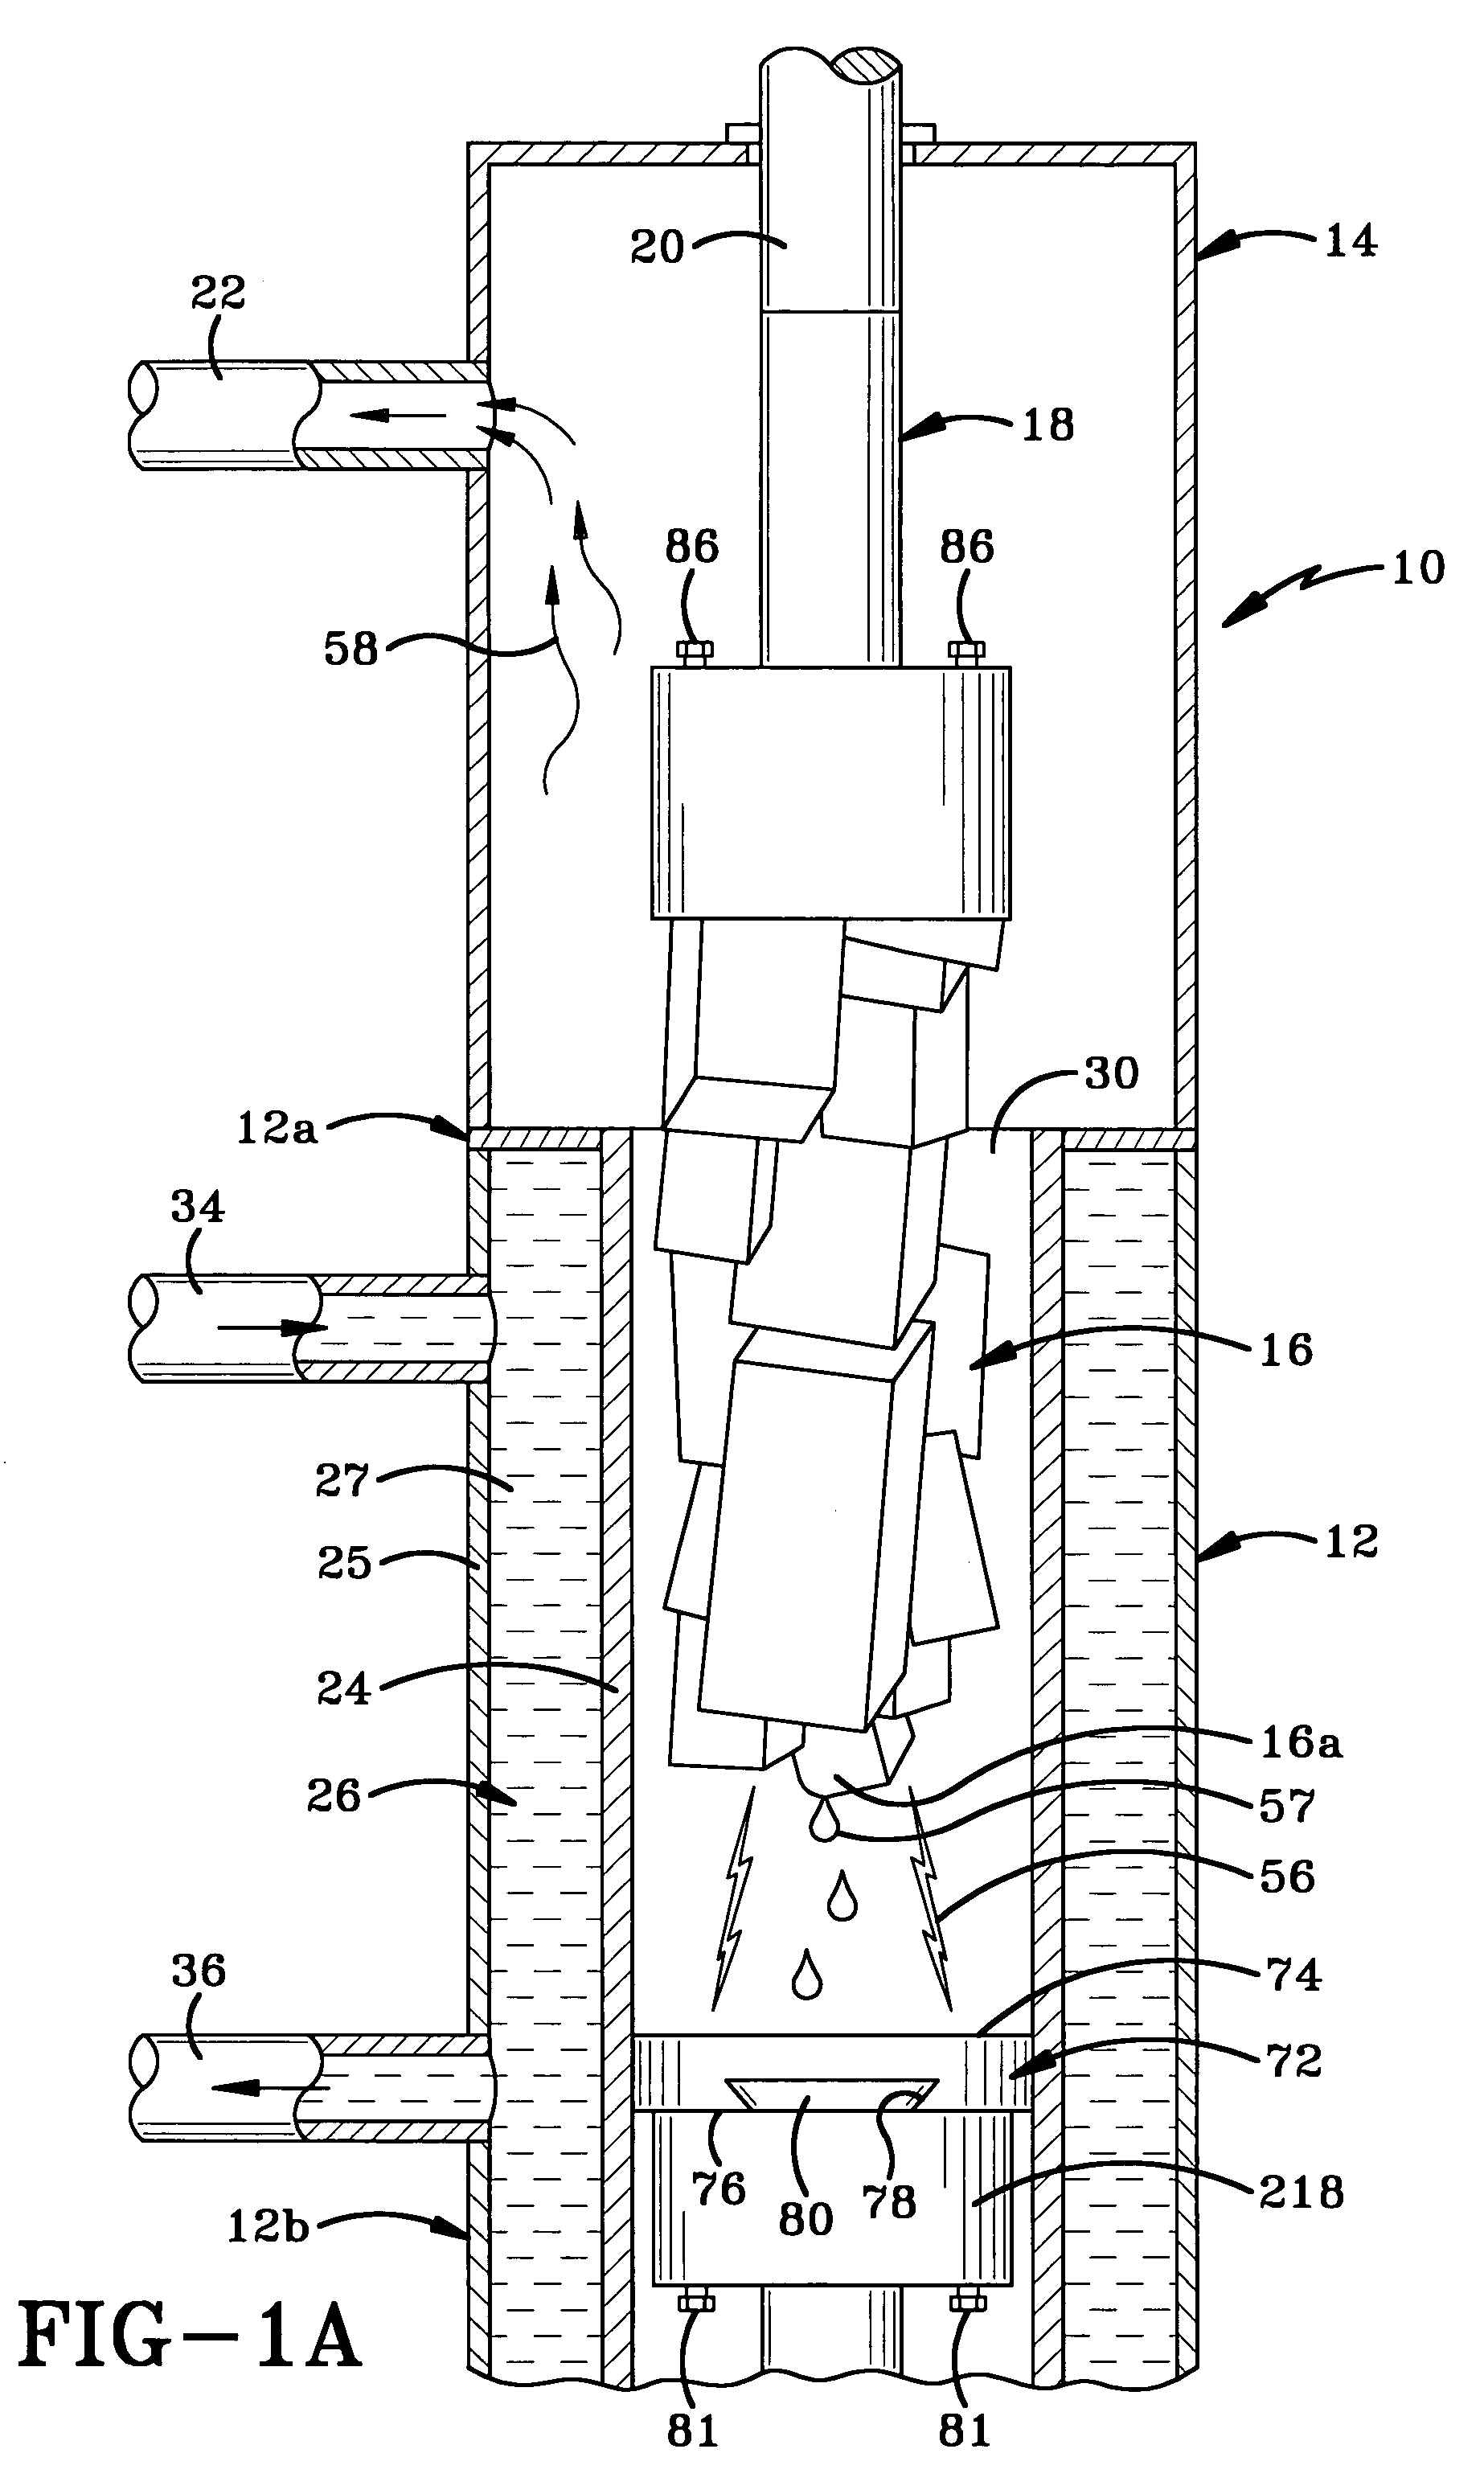 Method of manufacturing electrodes and a reusable header for use therewith